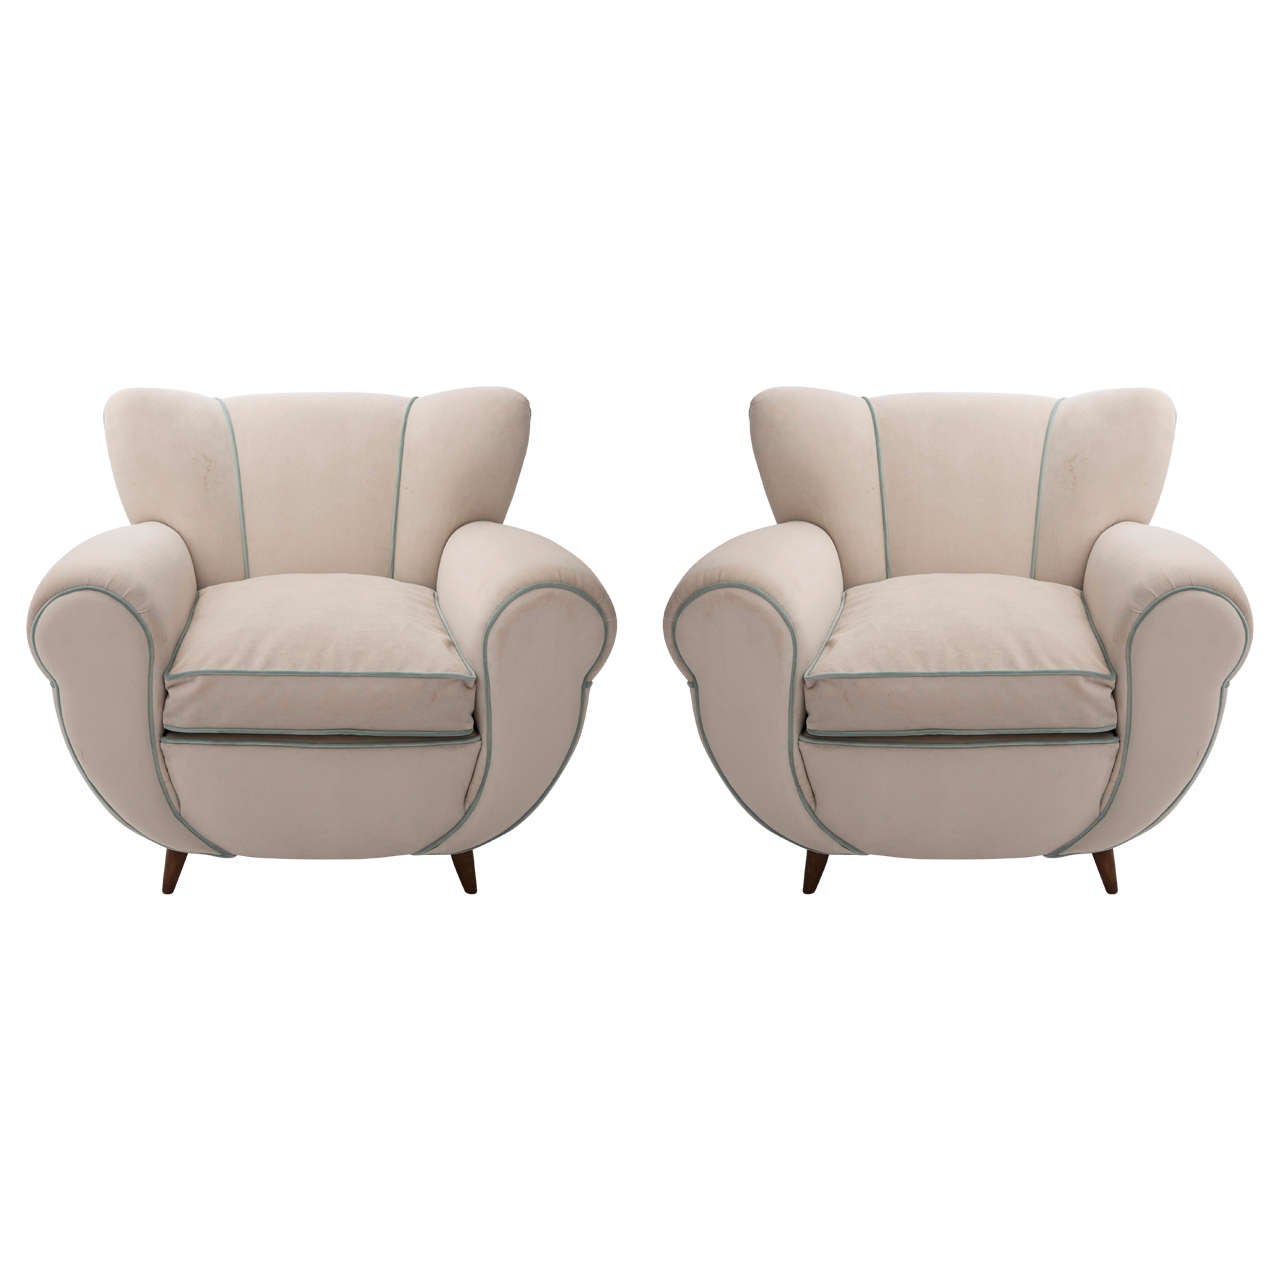 Guglielmo Ulrich attributed pair of armchairs, Italy circa 1940